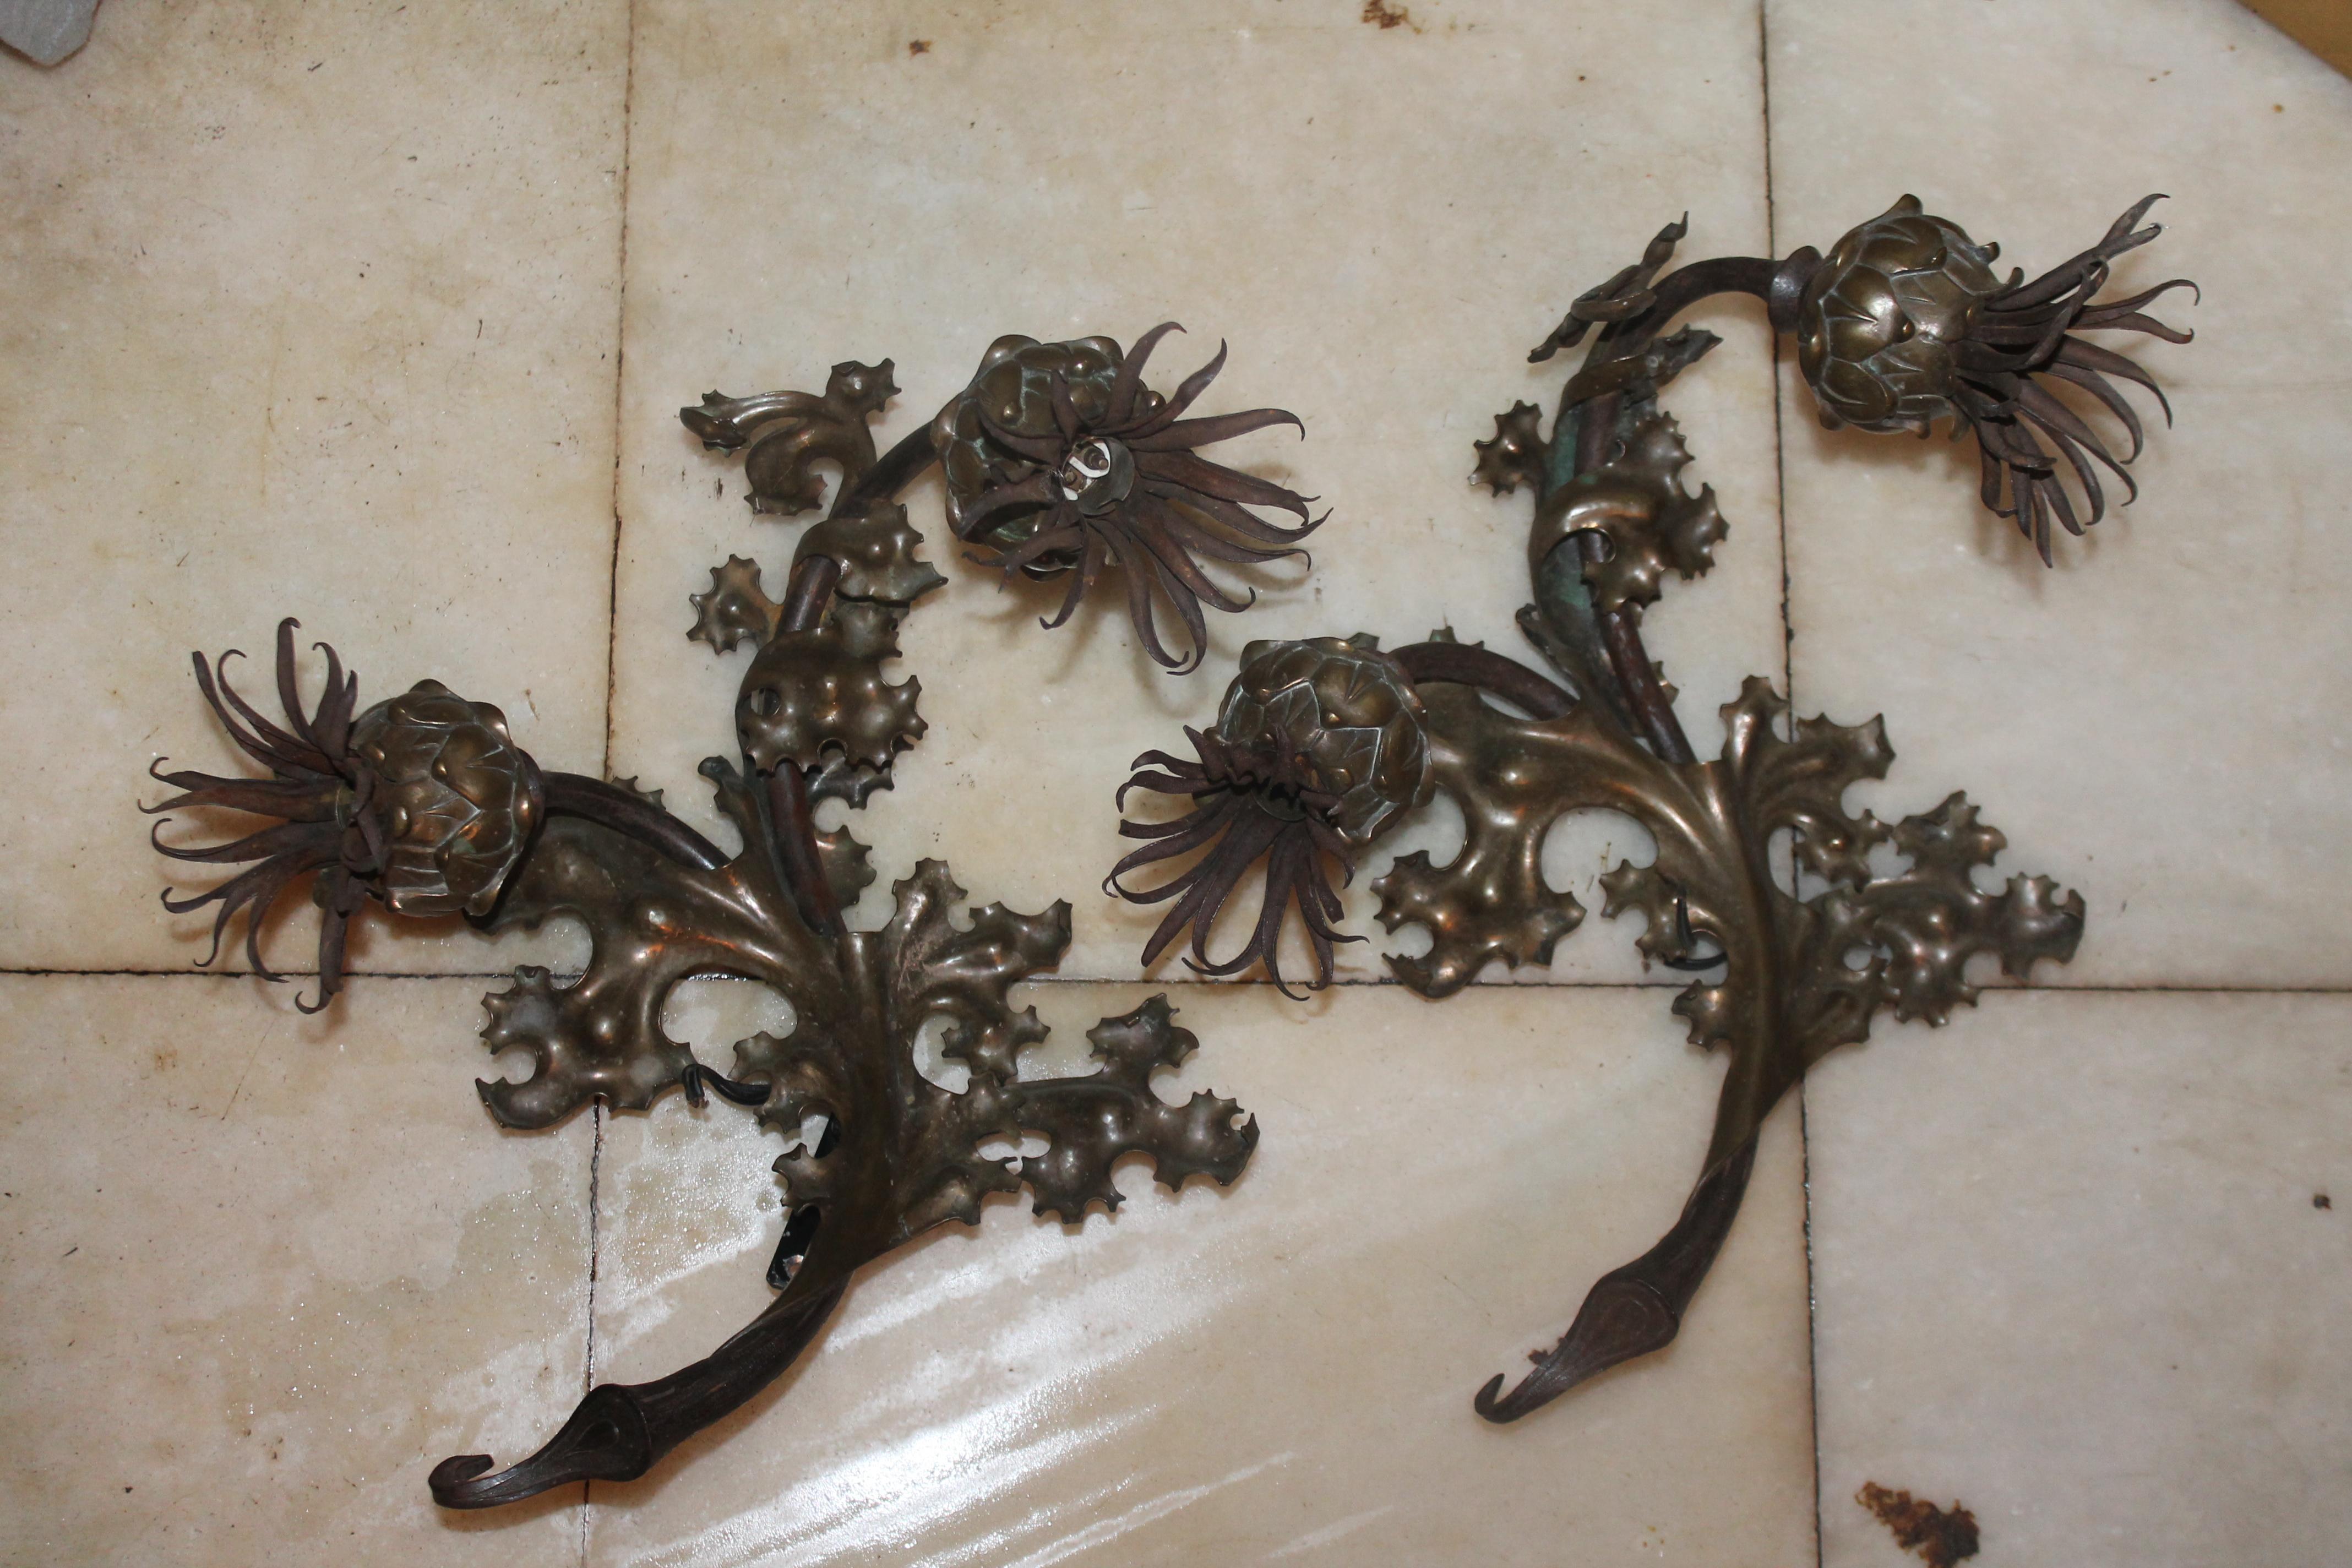 Rare Pair of French Art Deco 1920's Floral on Vines Bronze Wall Sconces. Attributed to Maison Jansen. Very high quality, heavy pair of  Sconces. All parts cast seperately and Artisan formed.